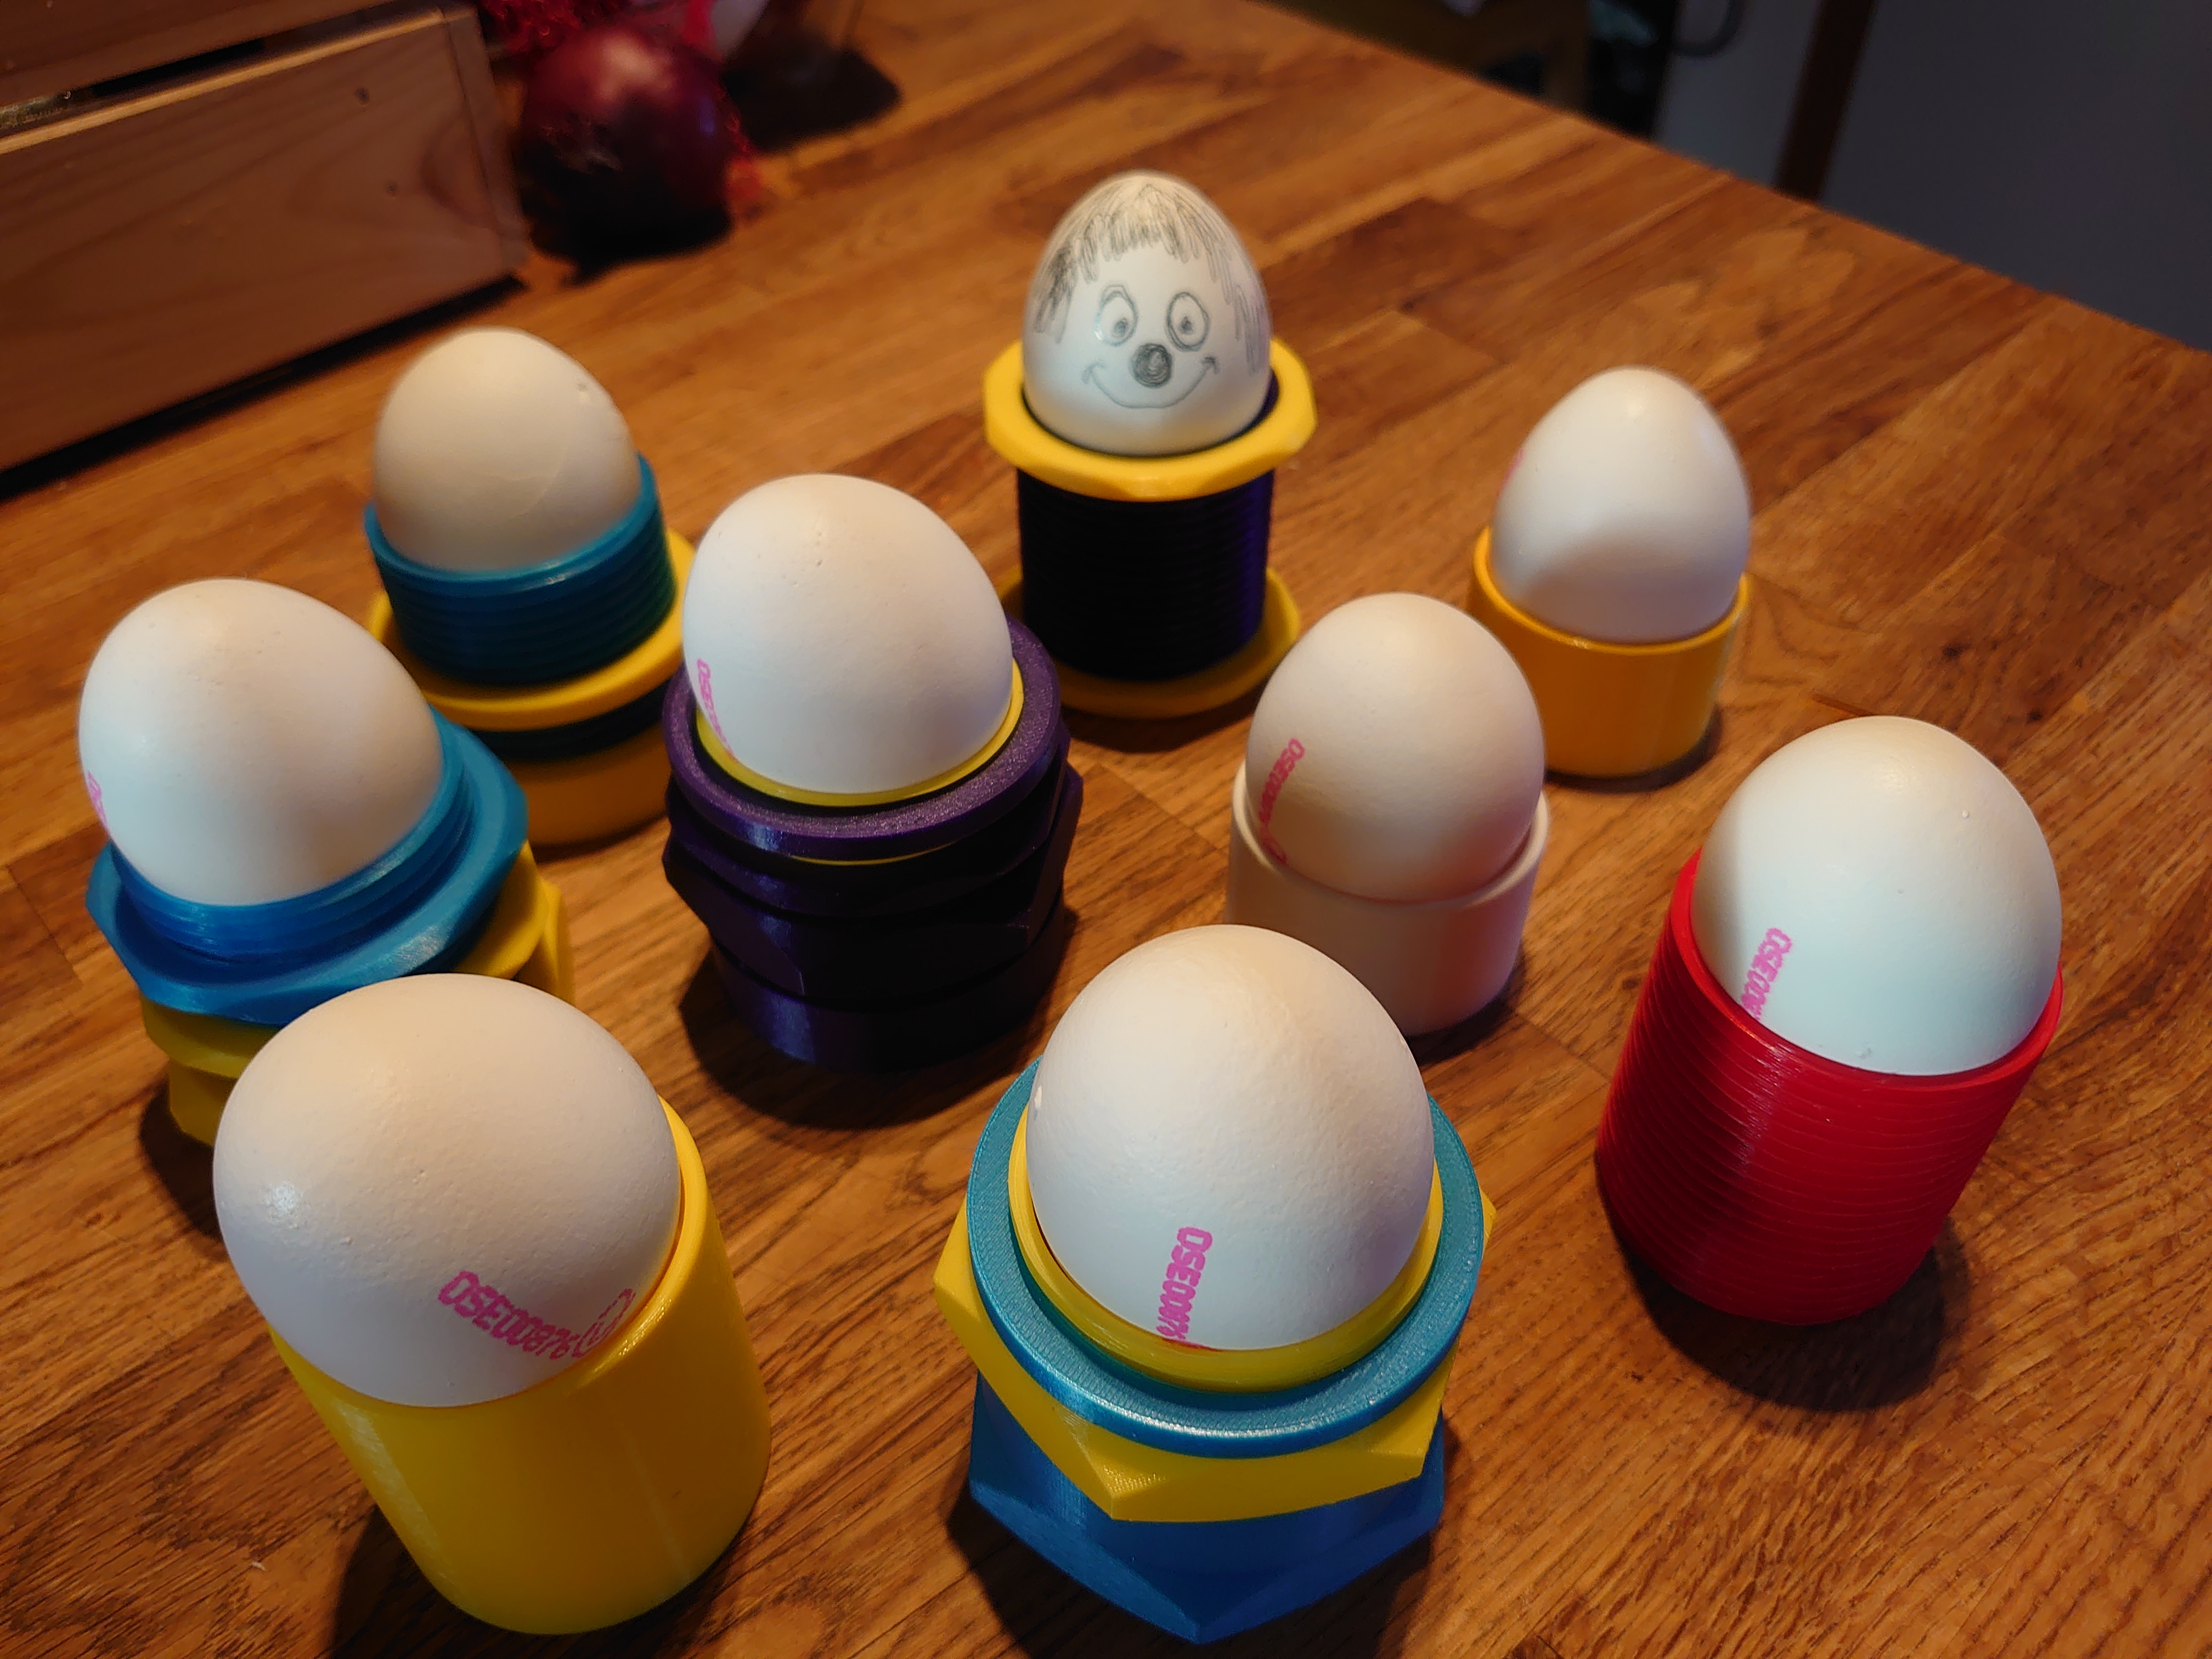 Egg cups, Easter is coming!